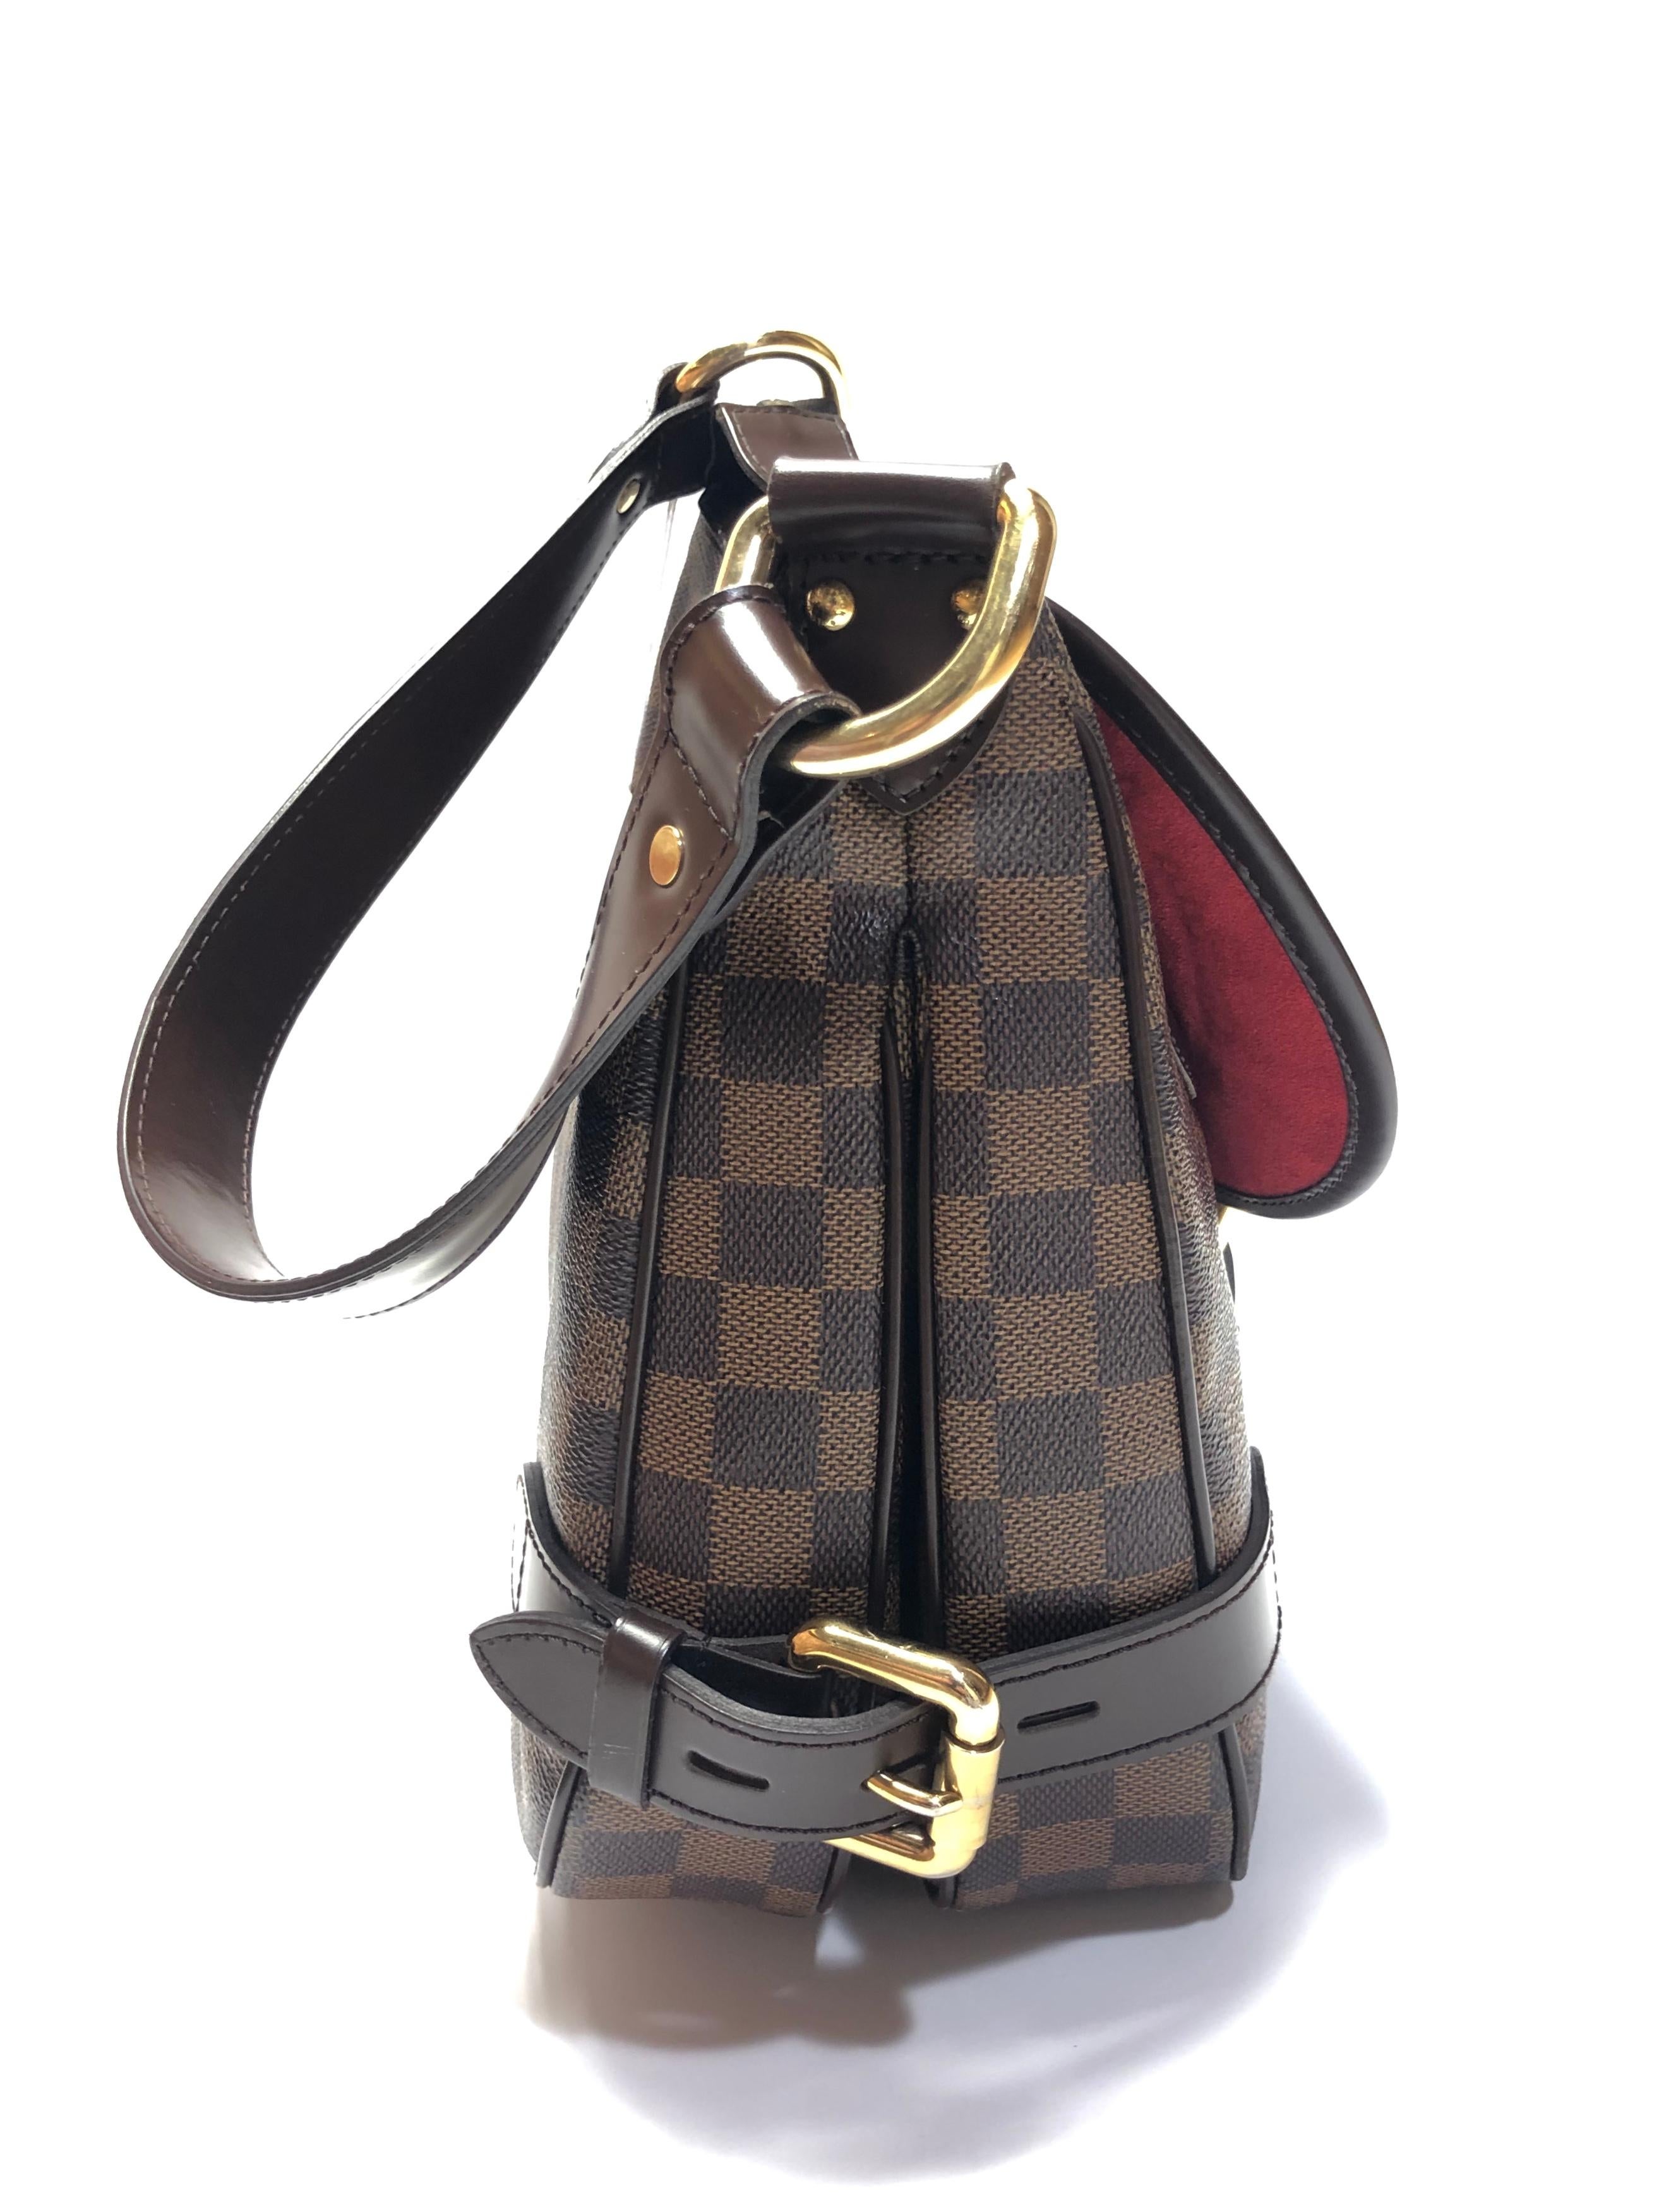 Brown and tan Damier Ebene coated canvas Louis Vuitton Highbury bag with brass hardware, Moka leather trim, single flat shoulder strap, single flap pocket with buckle closure at front, crimson Alcantara lining, dual interior compartments, dual